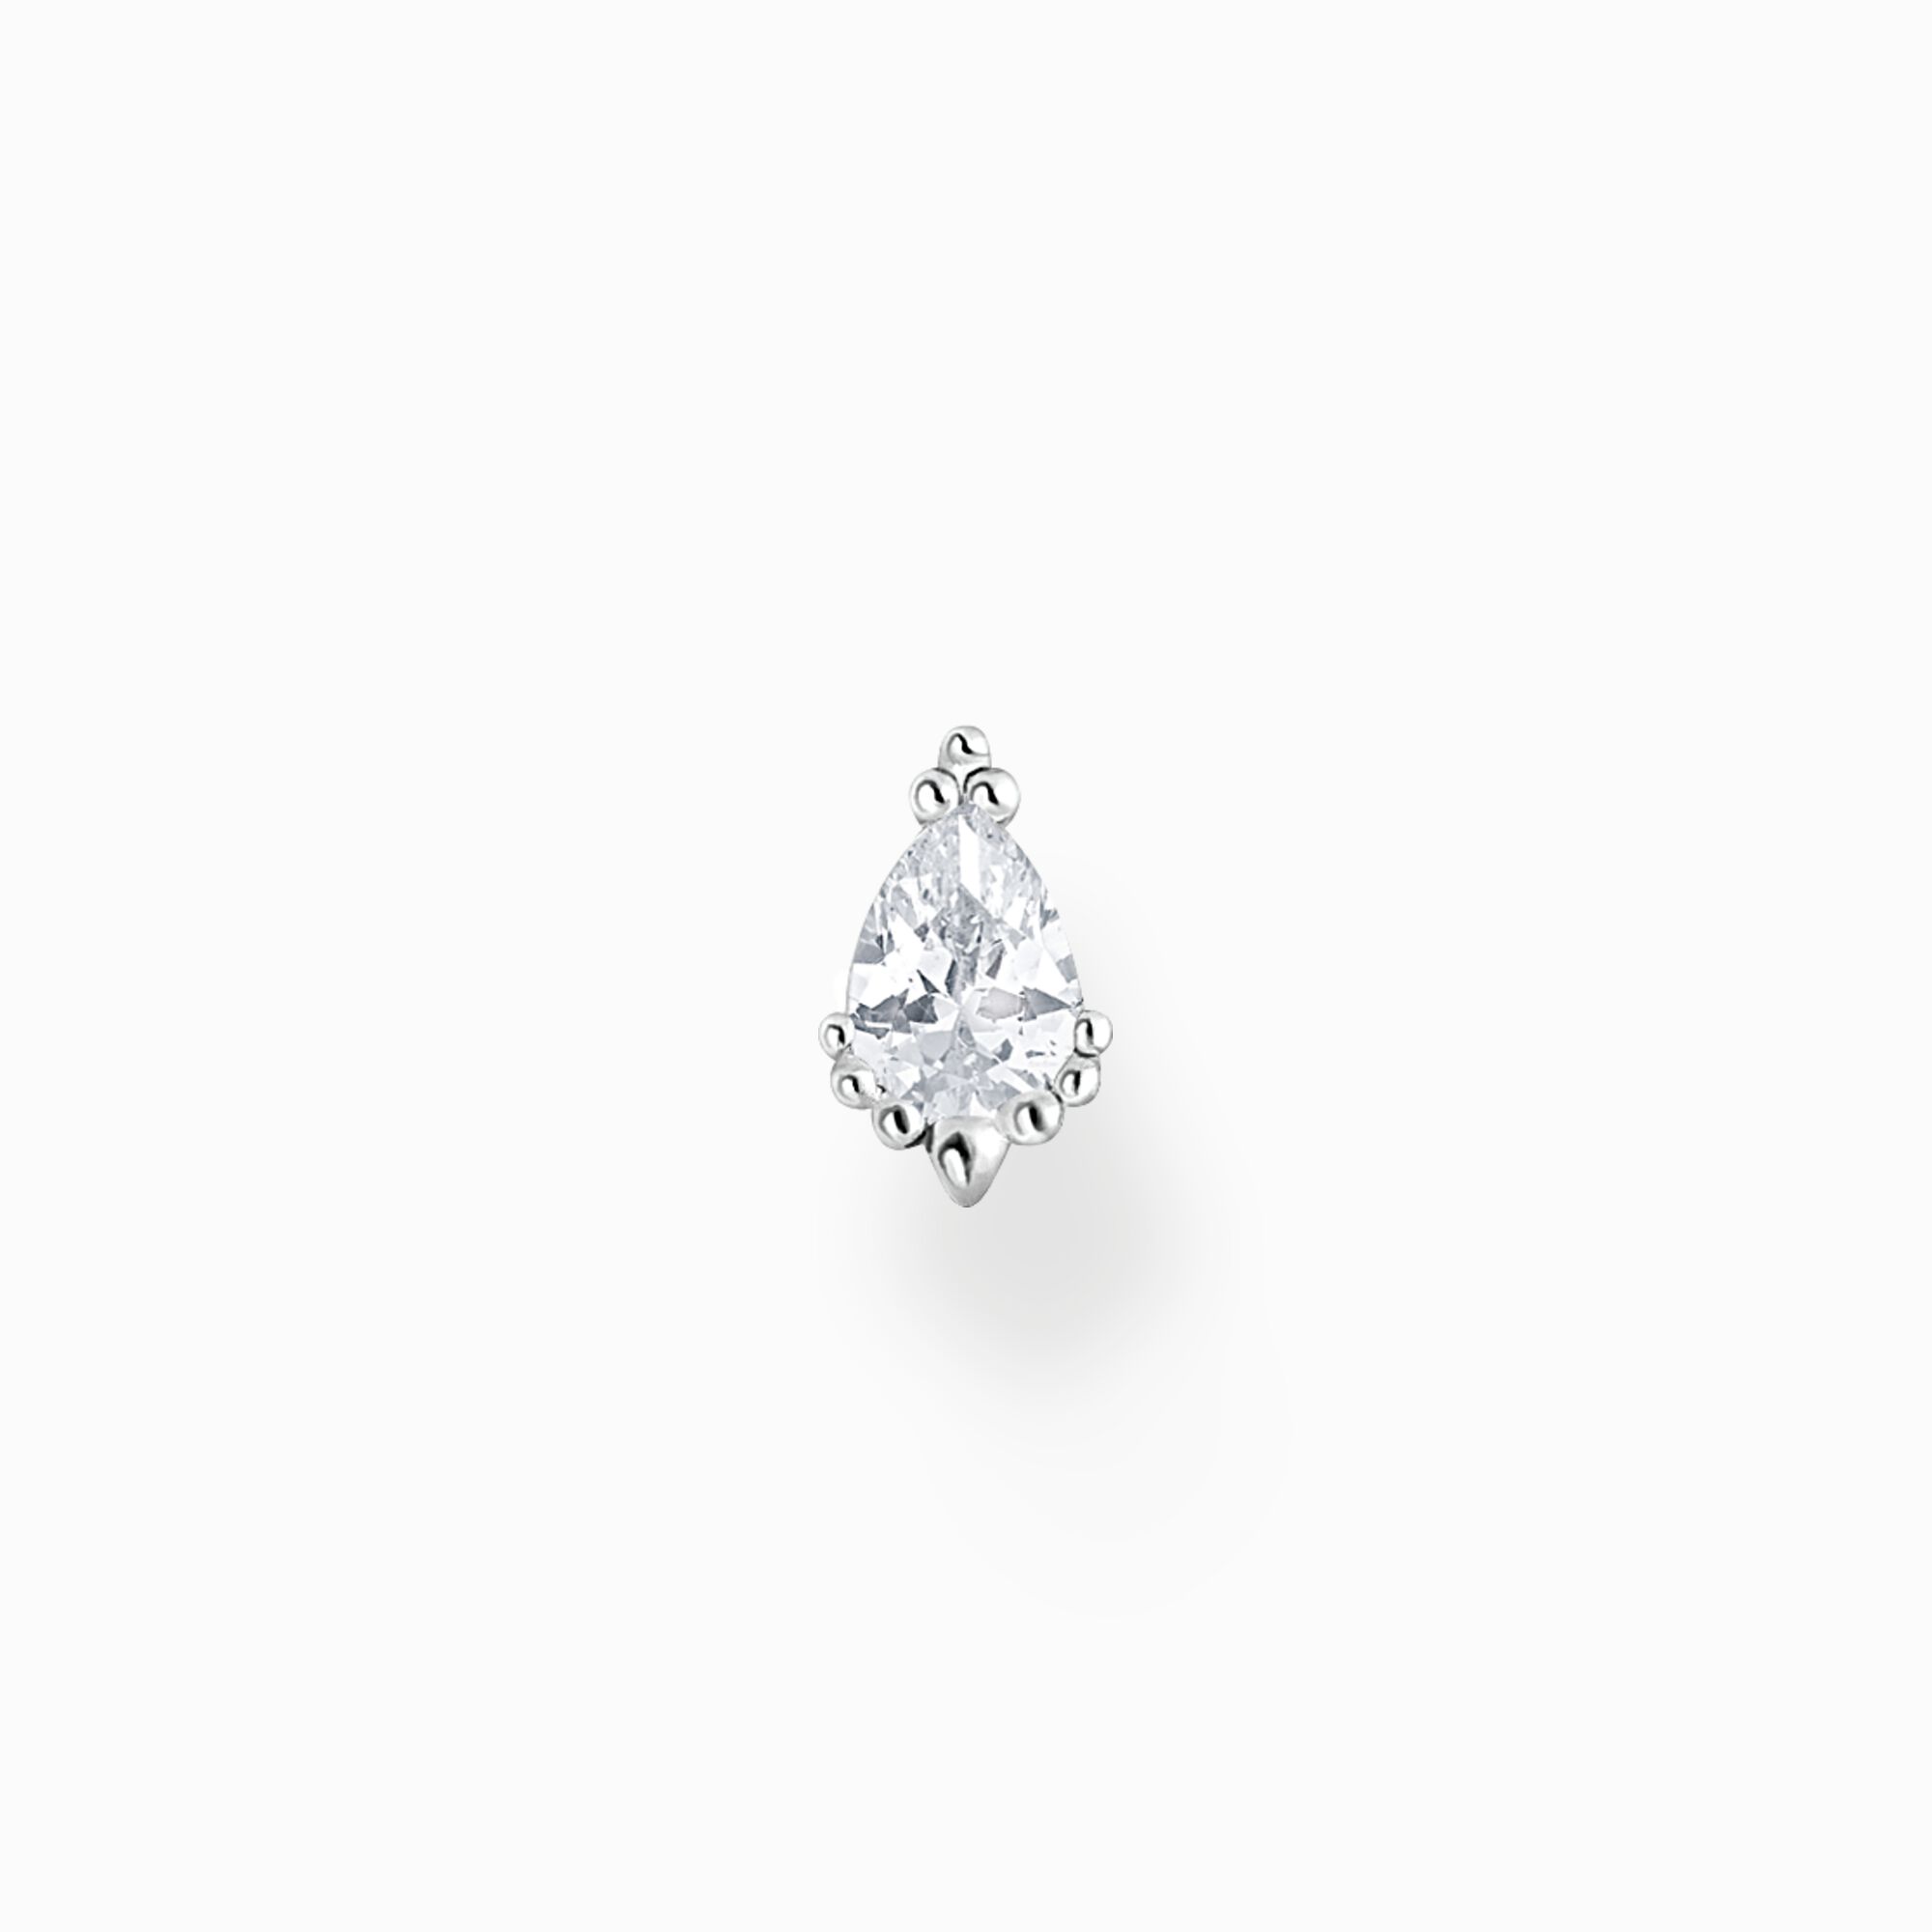 Single ear stud ice crystal silver from the Charming Collection collection in the THOMAS SABO online store